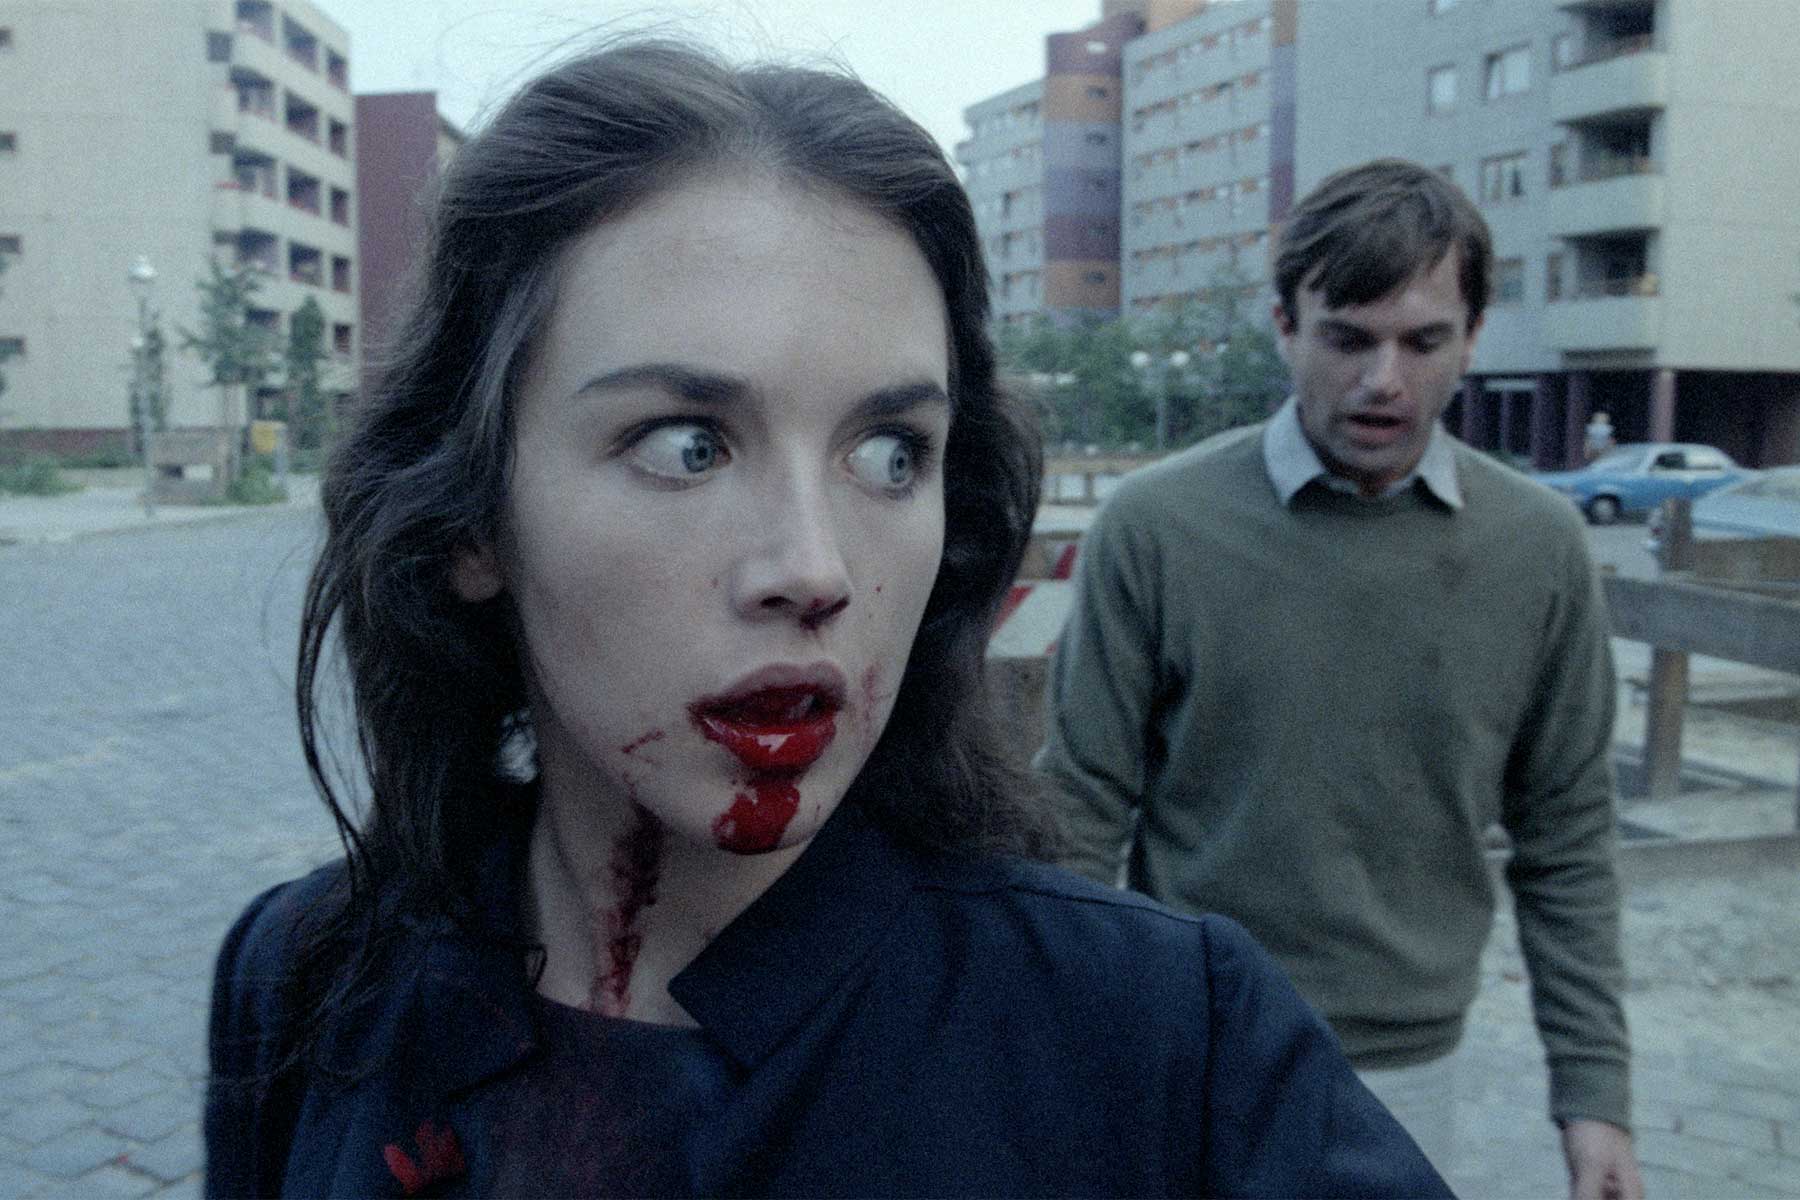 There are Crazed Manic Cult Movies, and Then There’s Possession